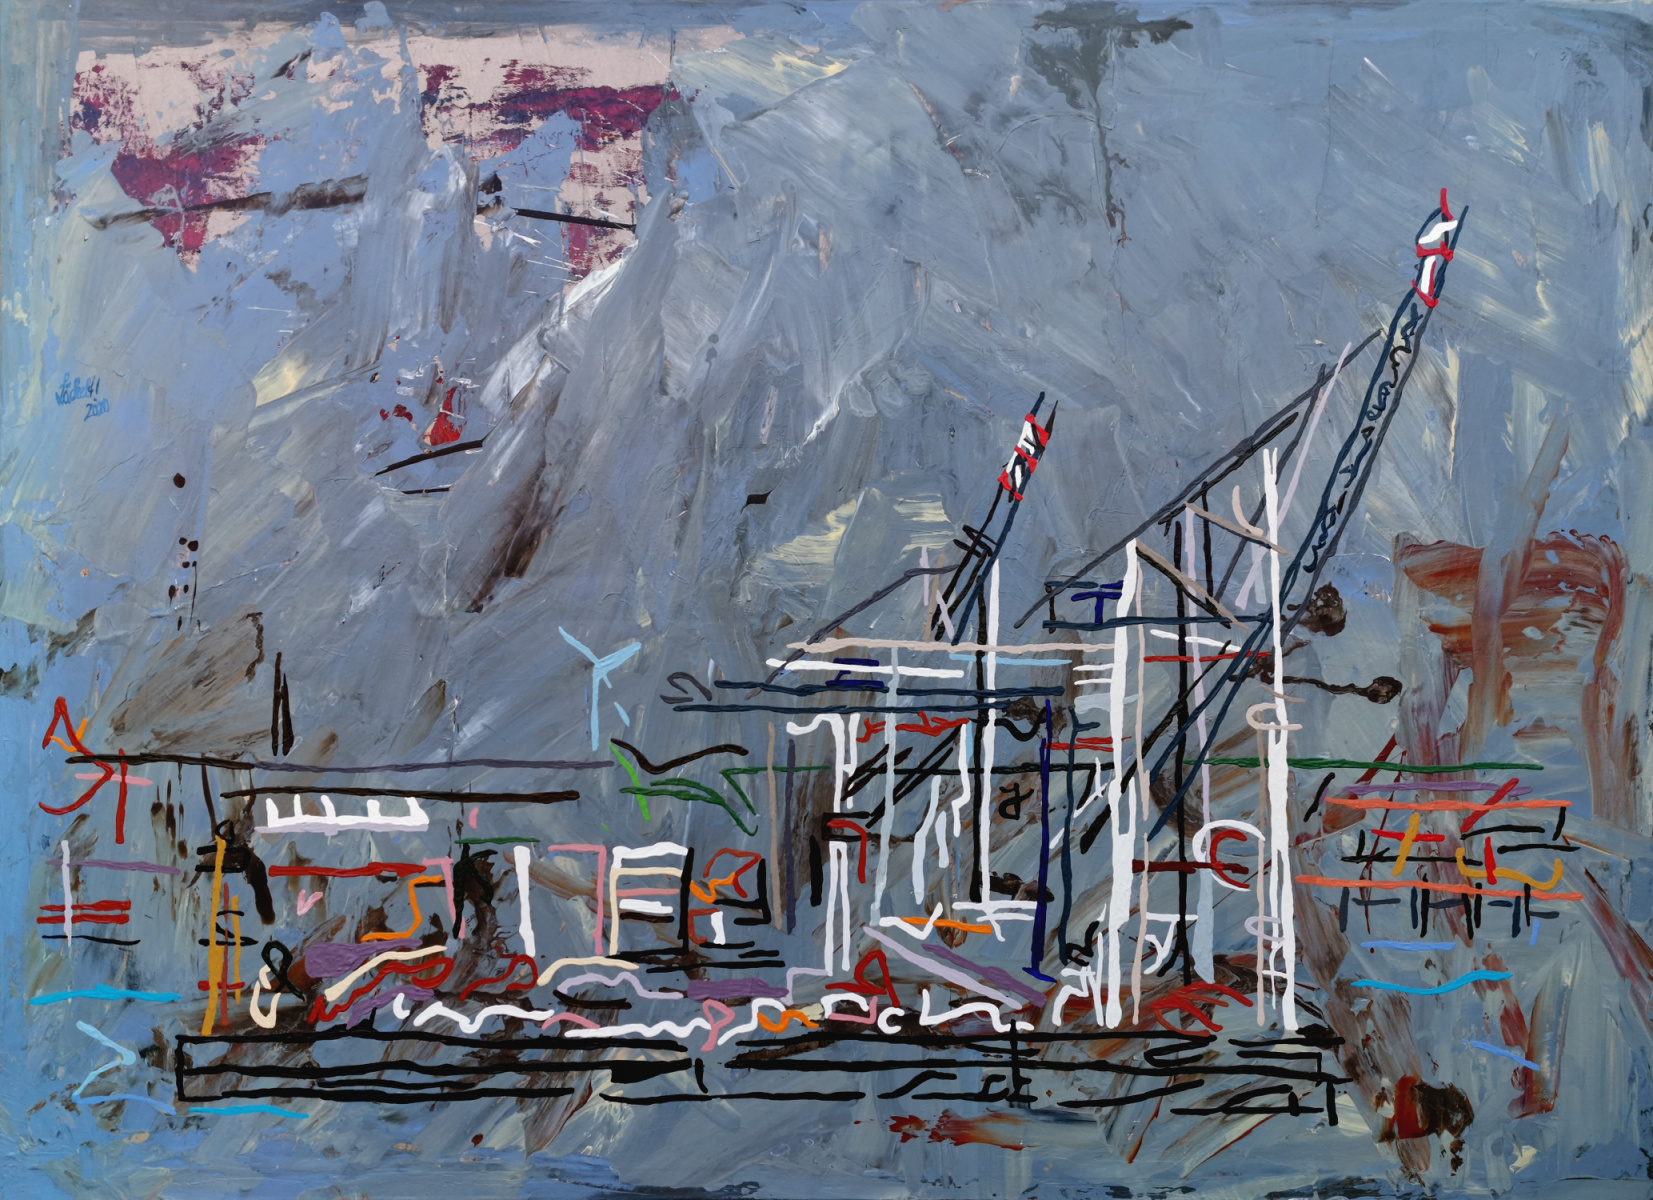 XXV 16 - View of the TollerOrt container terminal in Hamburg